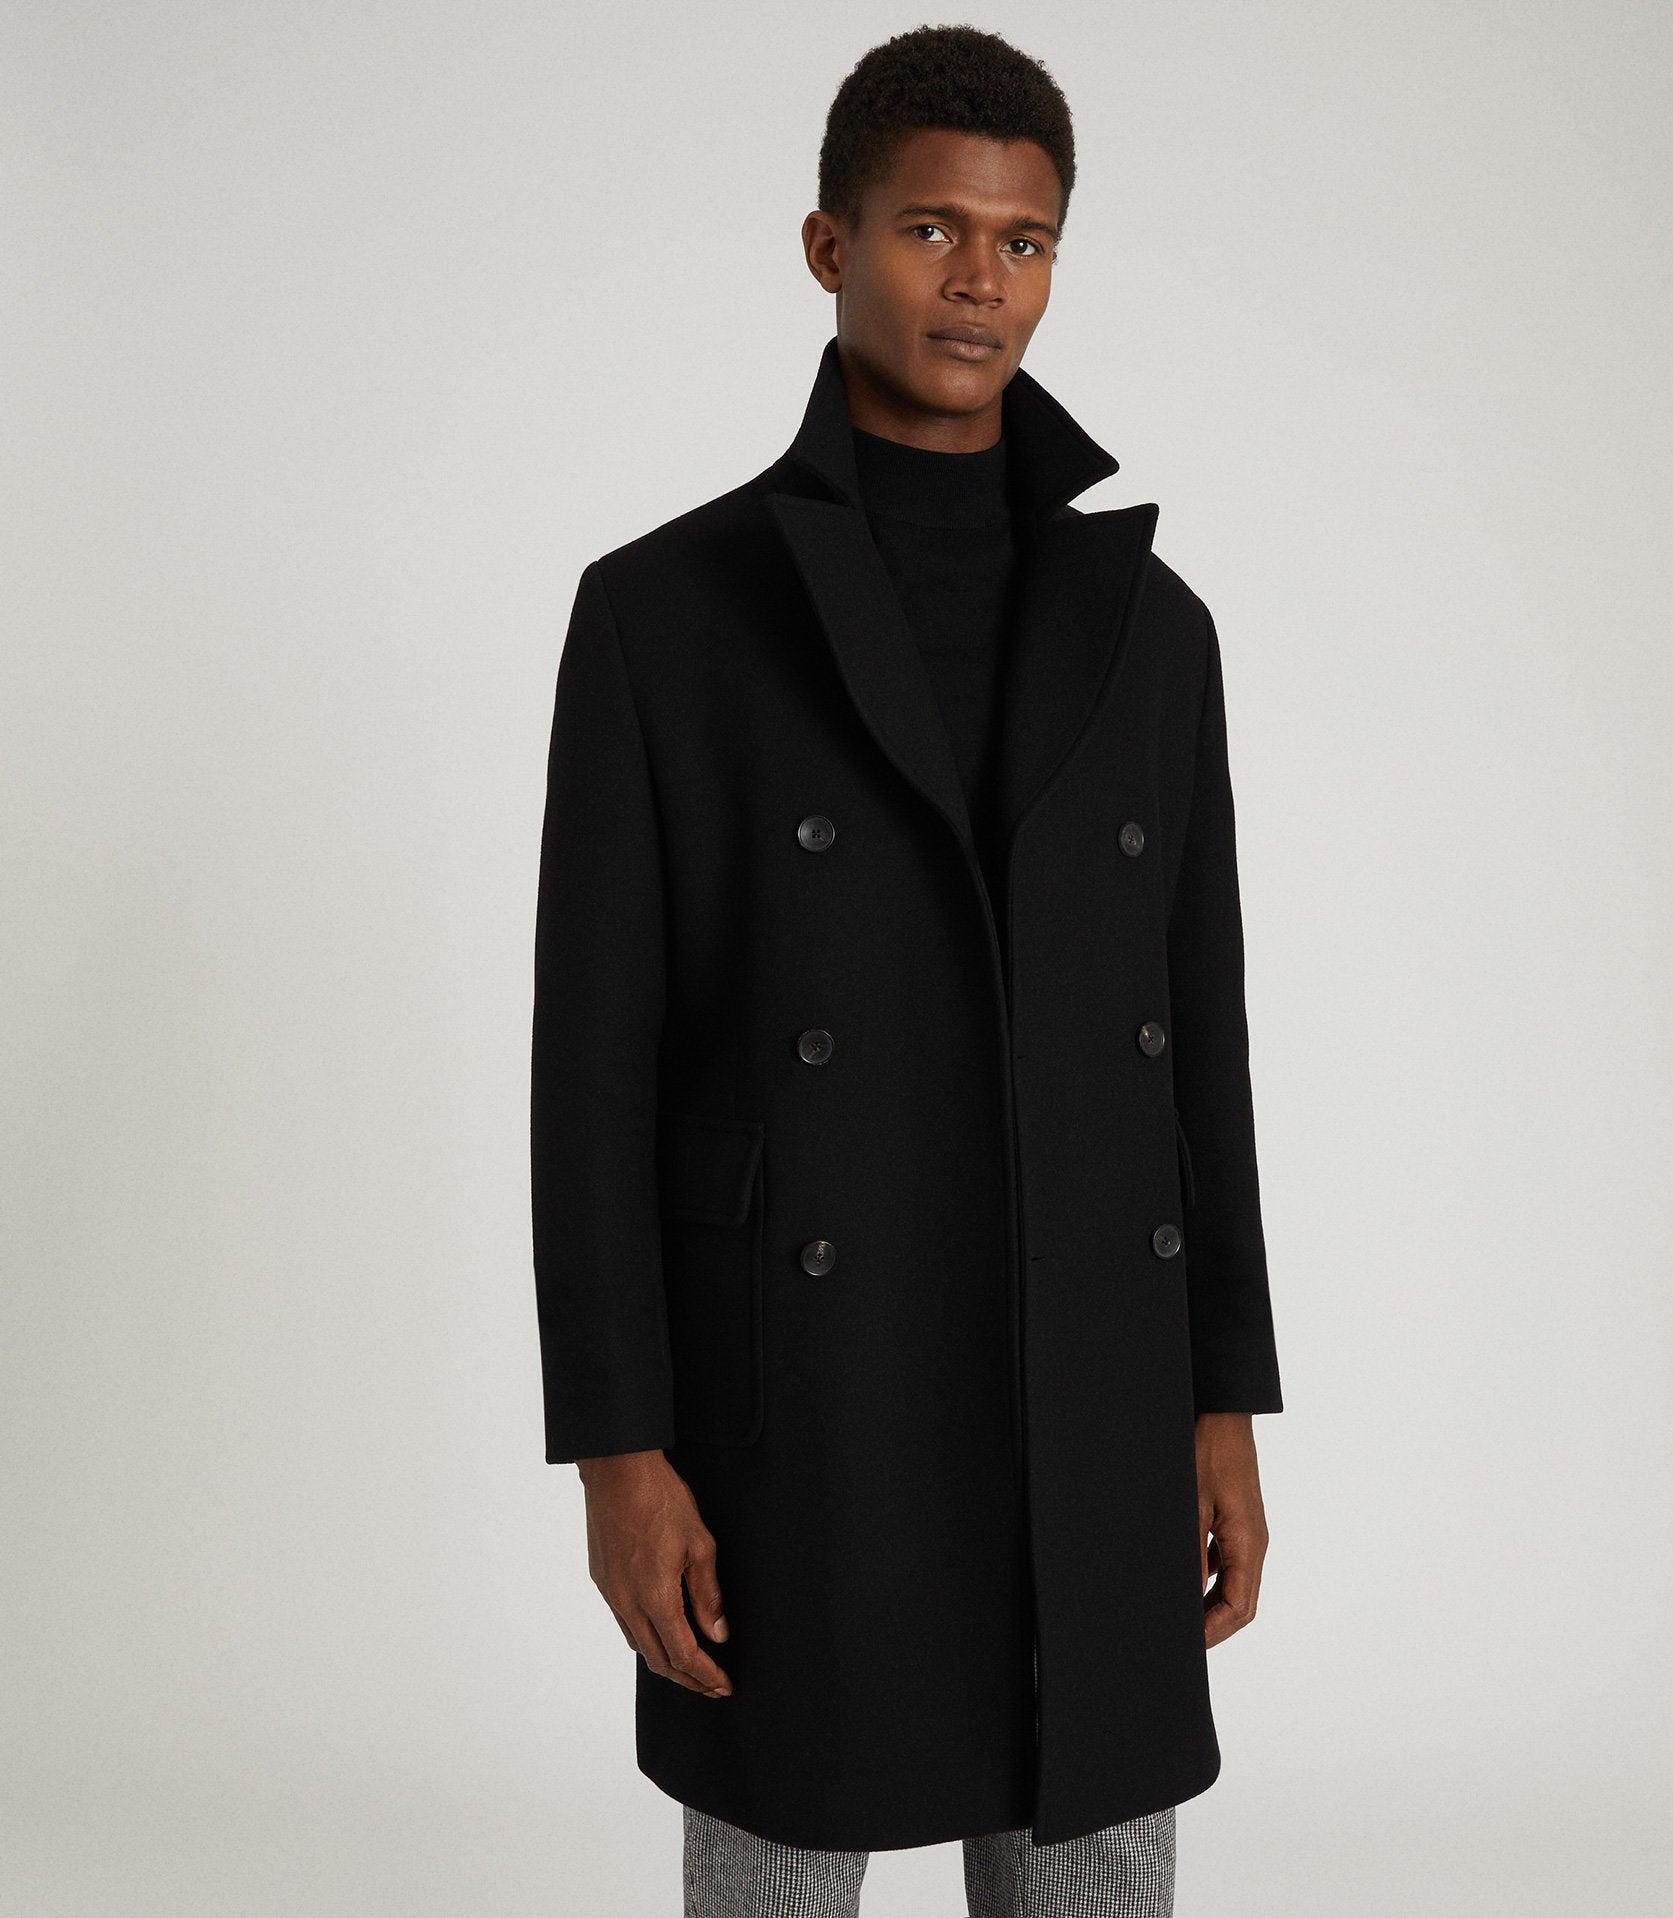 Reiss Wool Caleb - Double Breasted Overcoat in Black for Men - Lyst